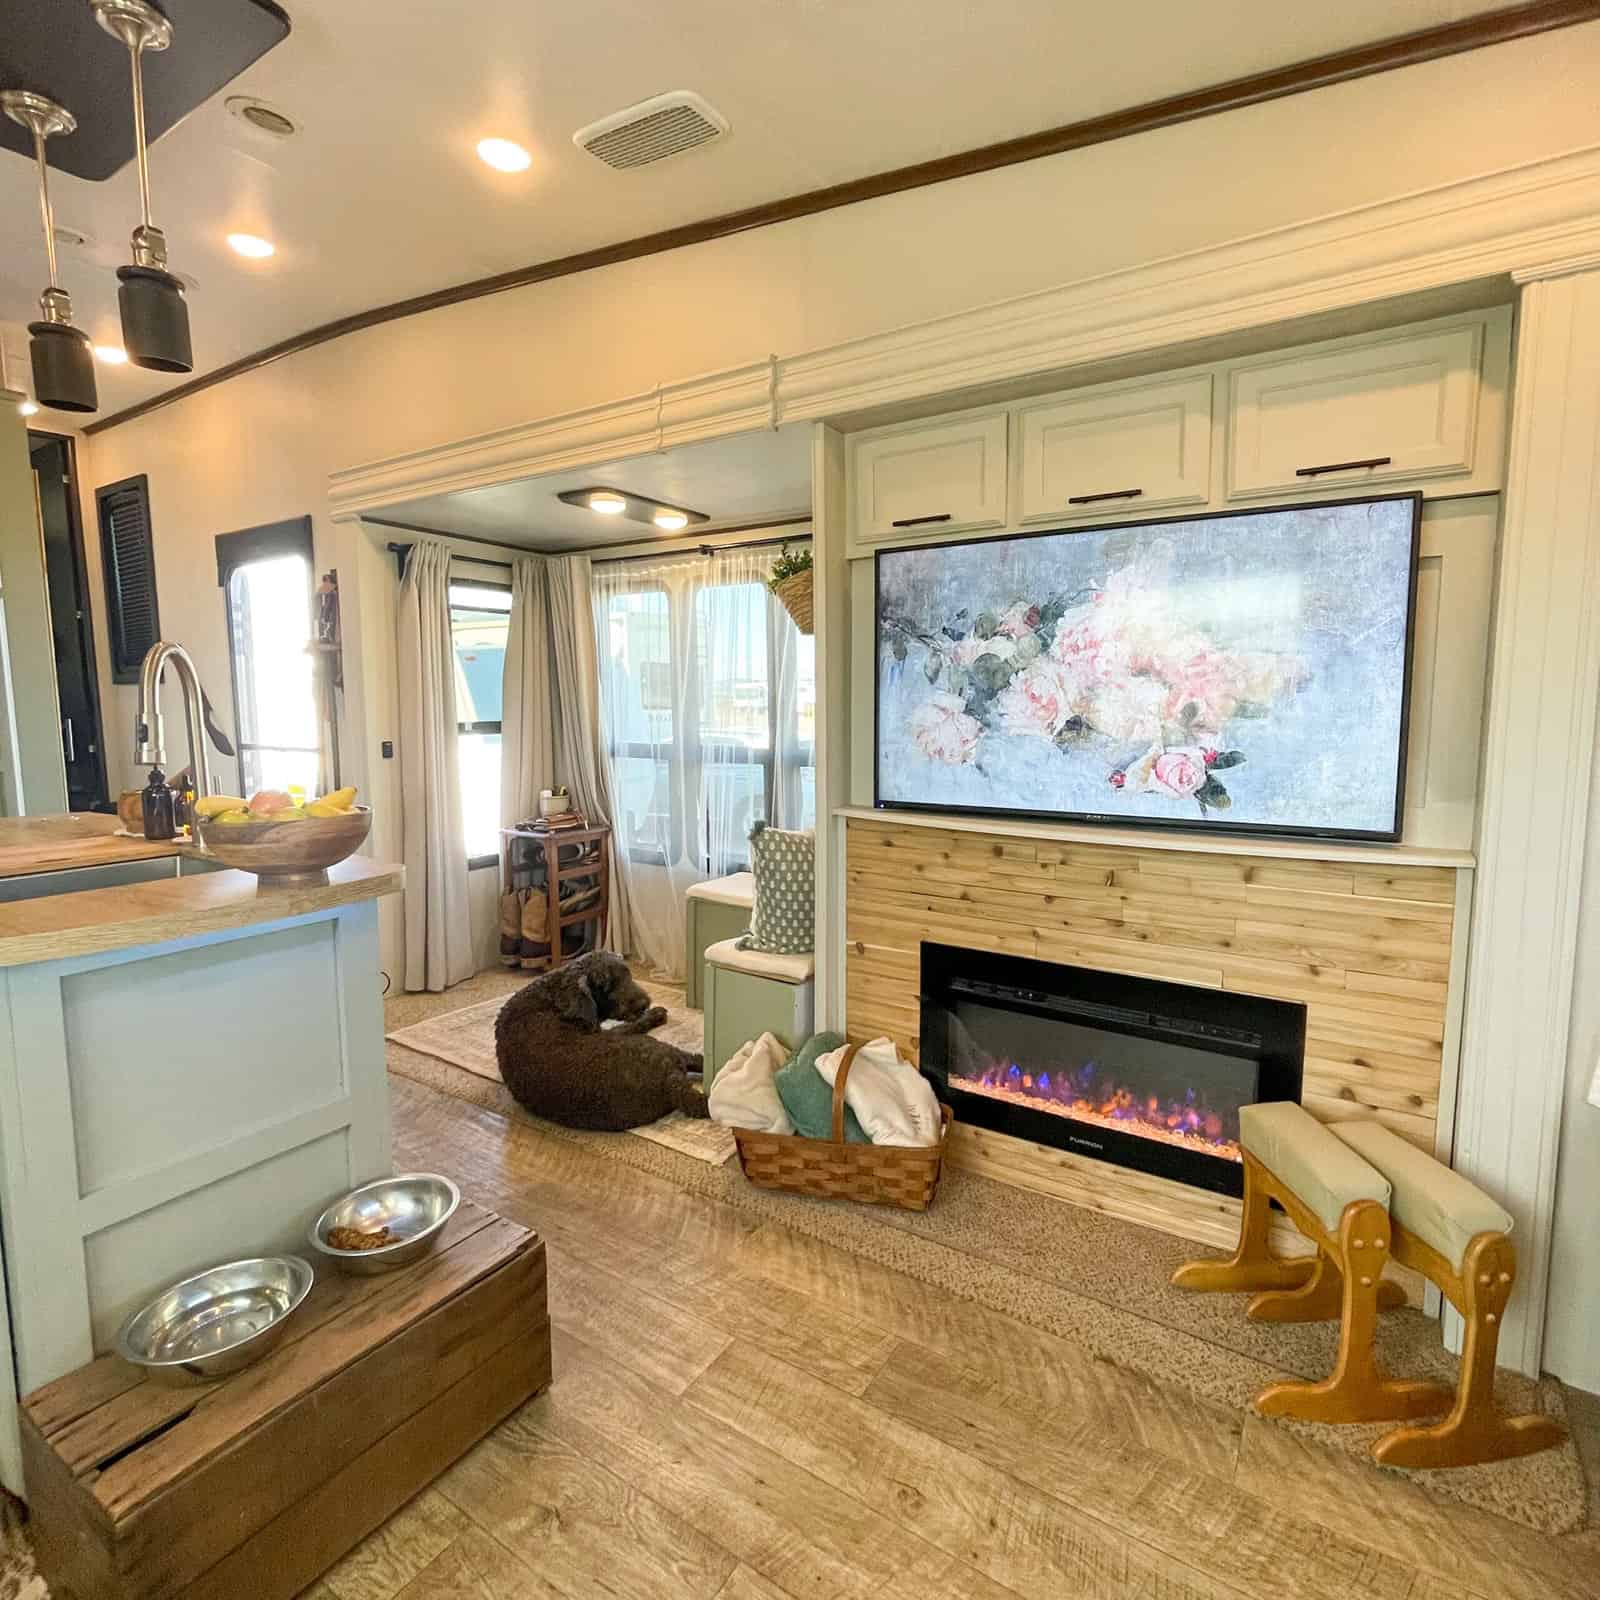 The renovated TV and fireplace fifth wheel area. (Image: Maggie Matlock) 